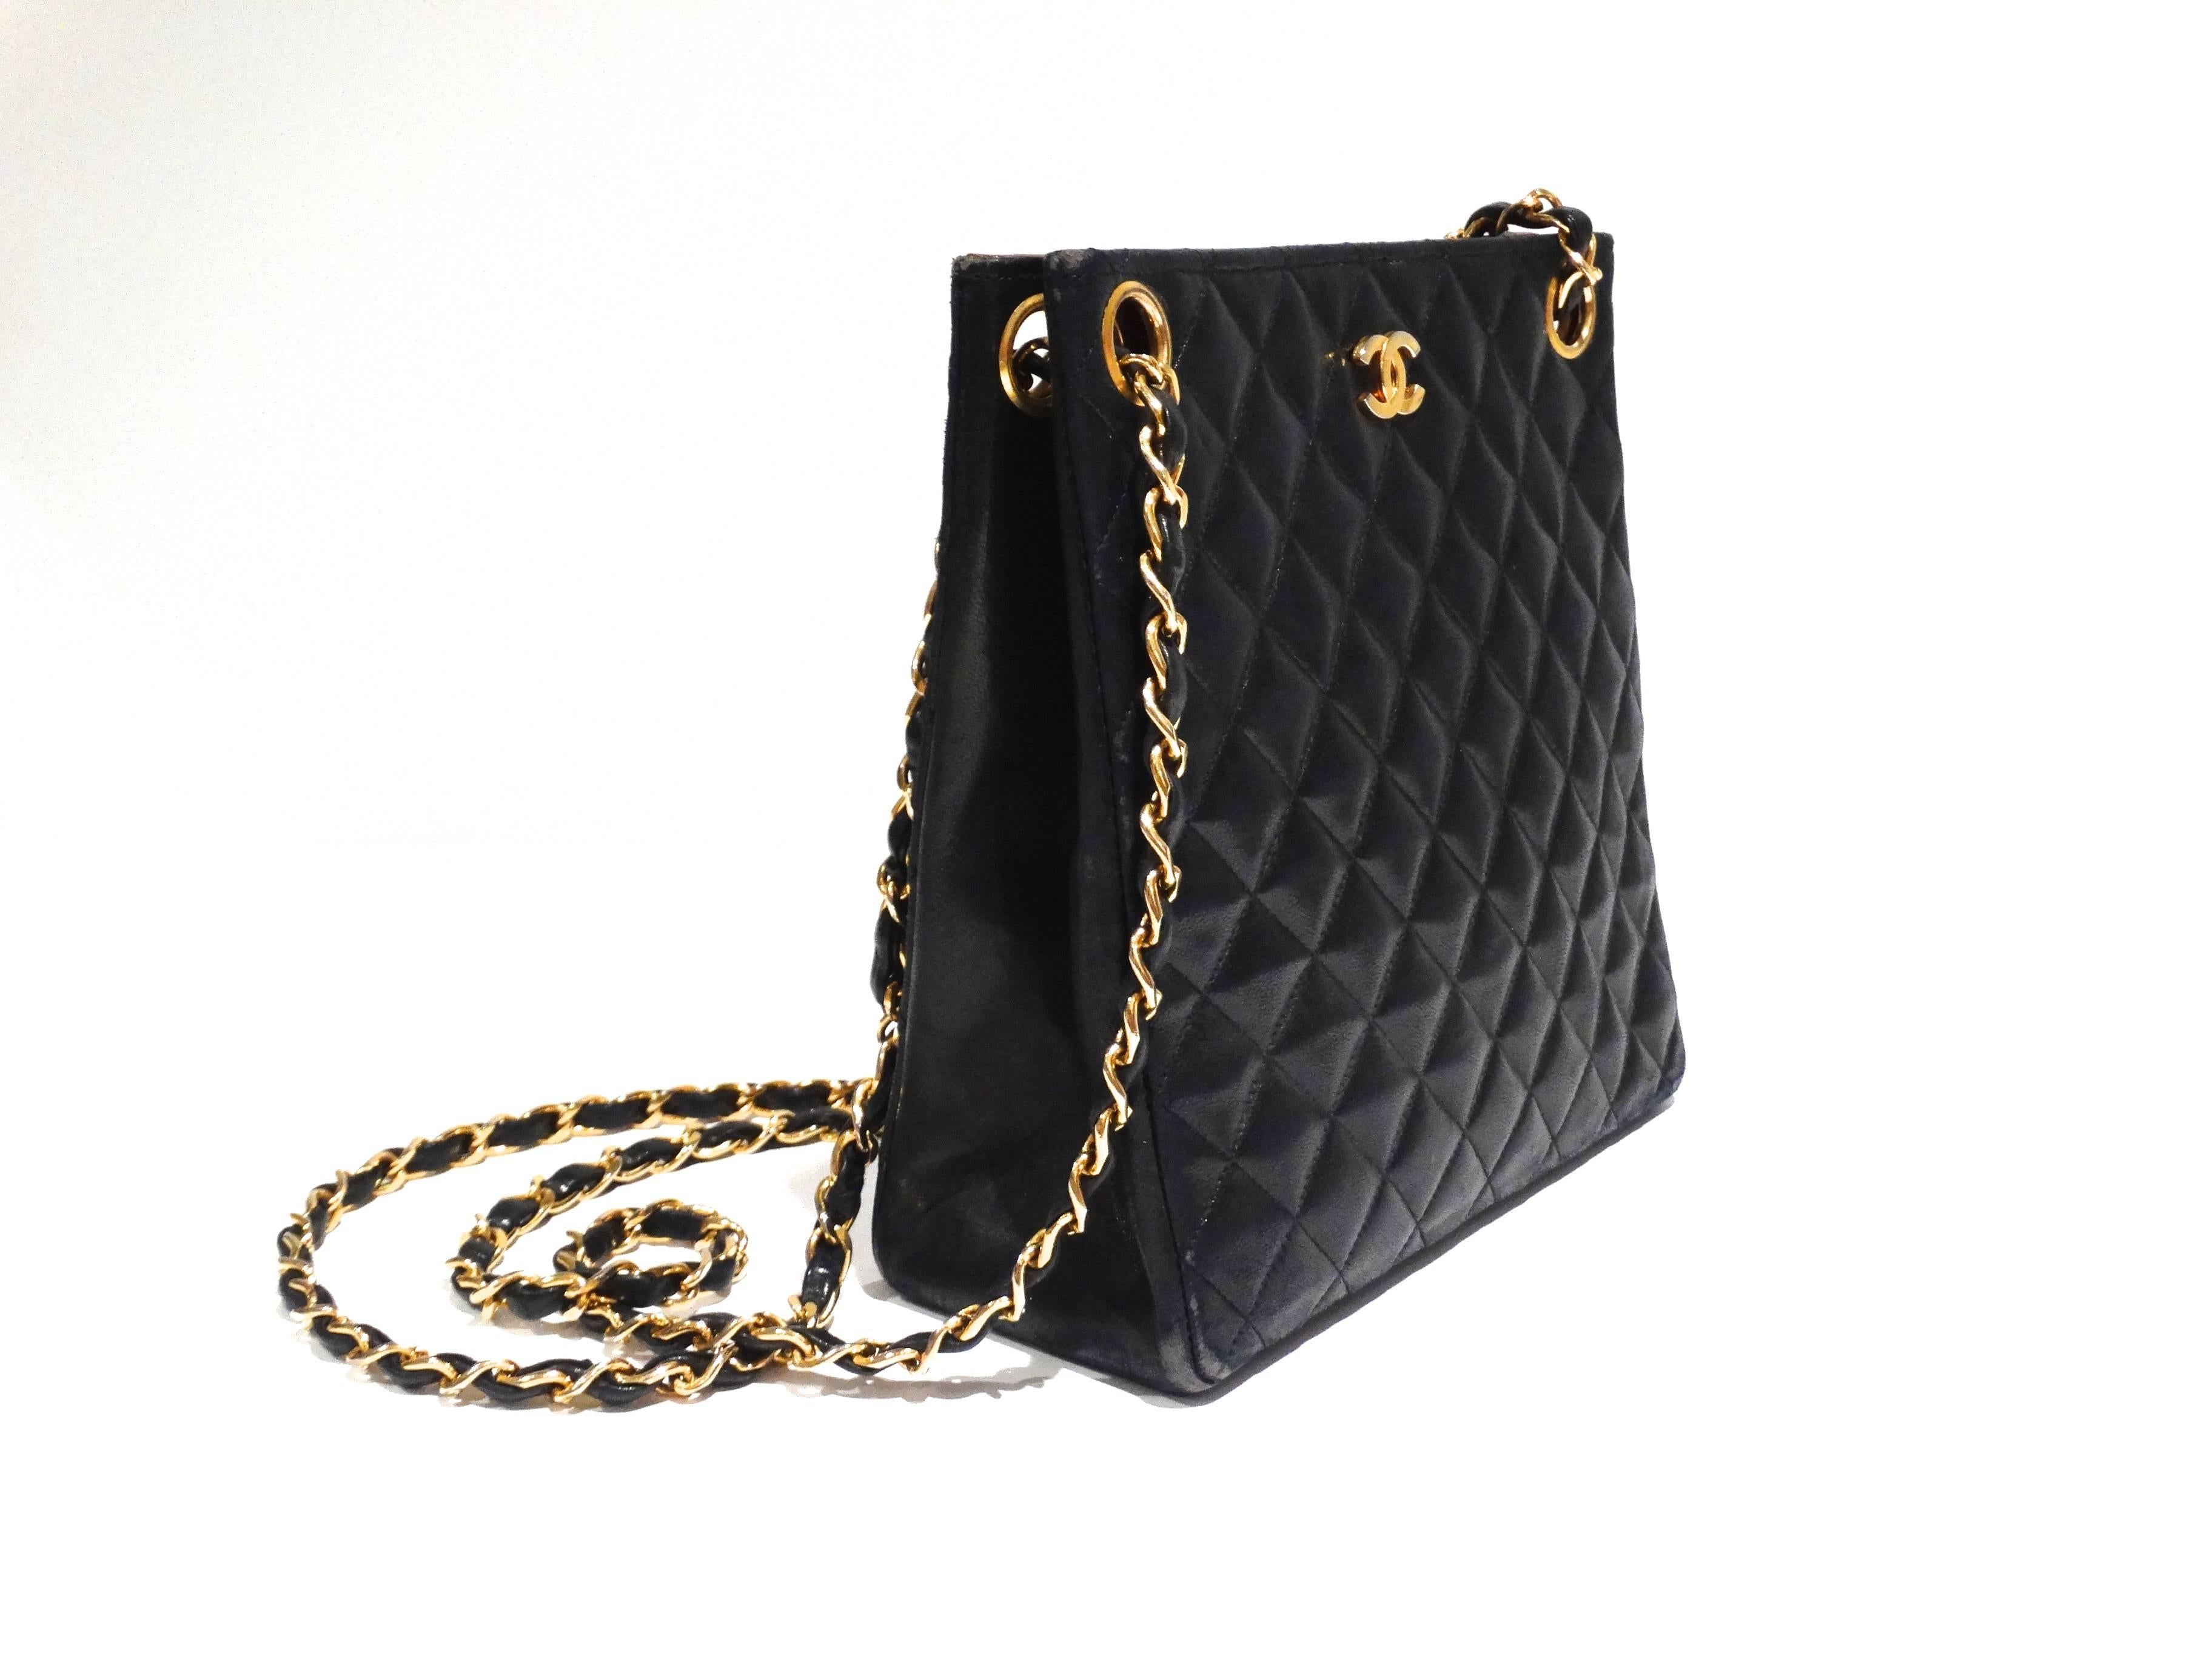 Classic 80's Structured Chanel Shoulder Bag...In a deep navy blue! I love the style of this Chanel bag , it's great for day or evening. Bag features black leather,  diamond quilted detailing,  gold CC logo at front and a gold chain shoulder strap